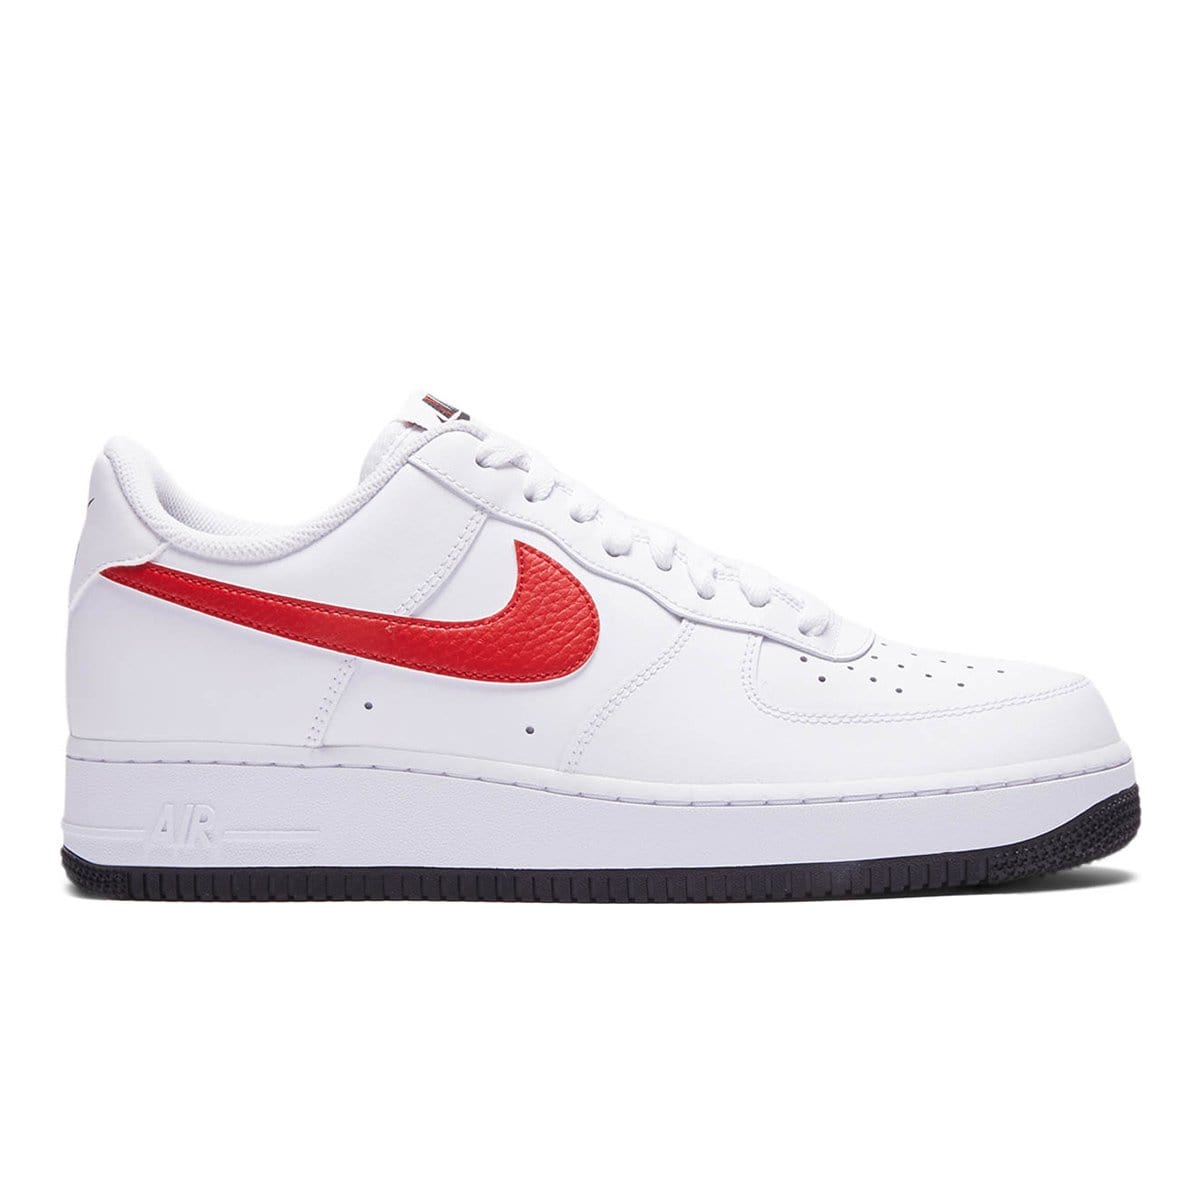 red and blue swoosh air force 1